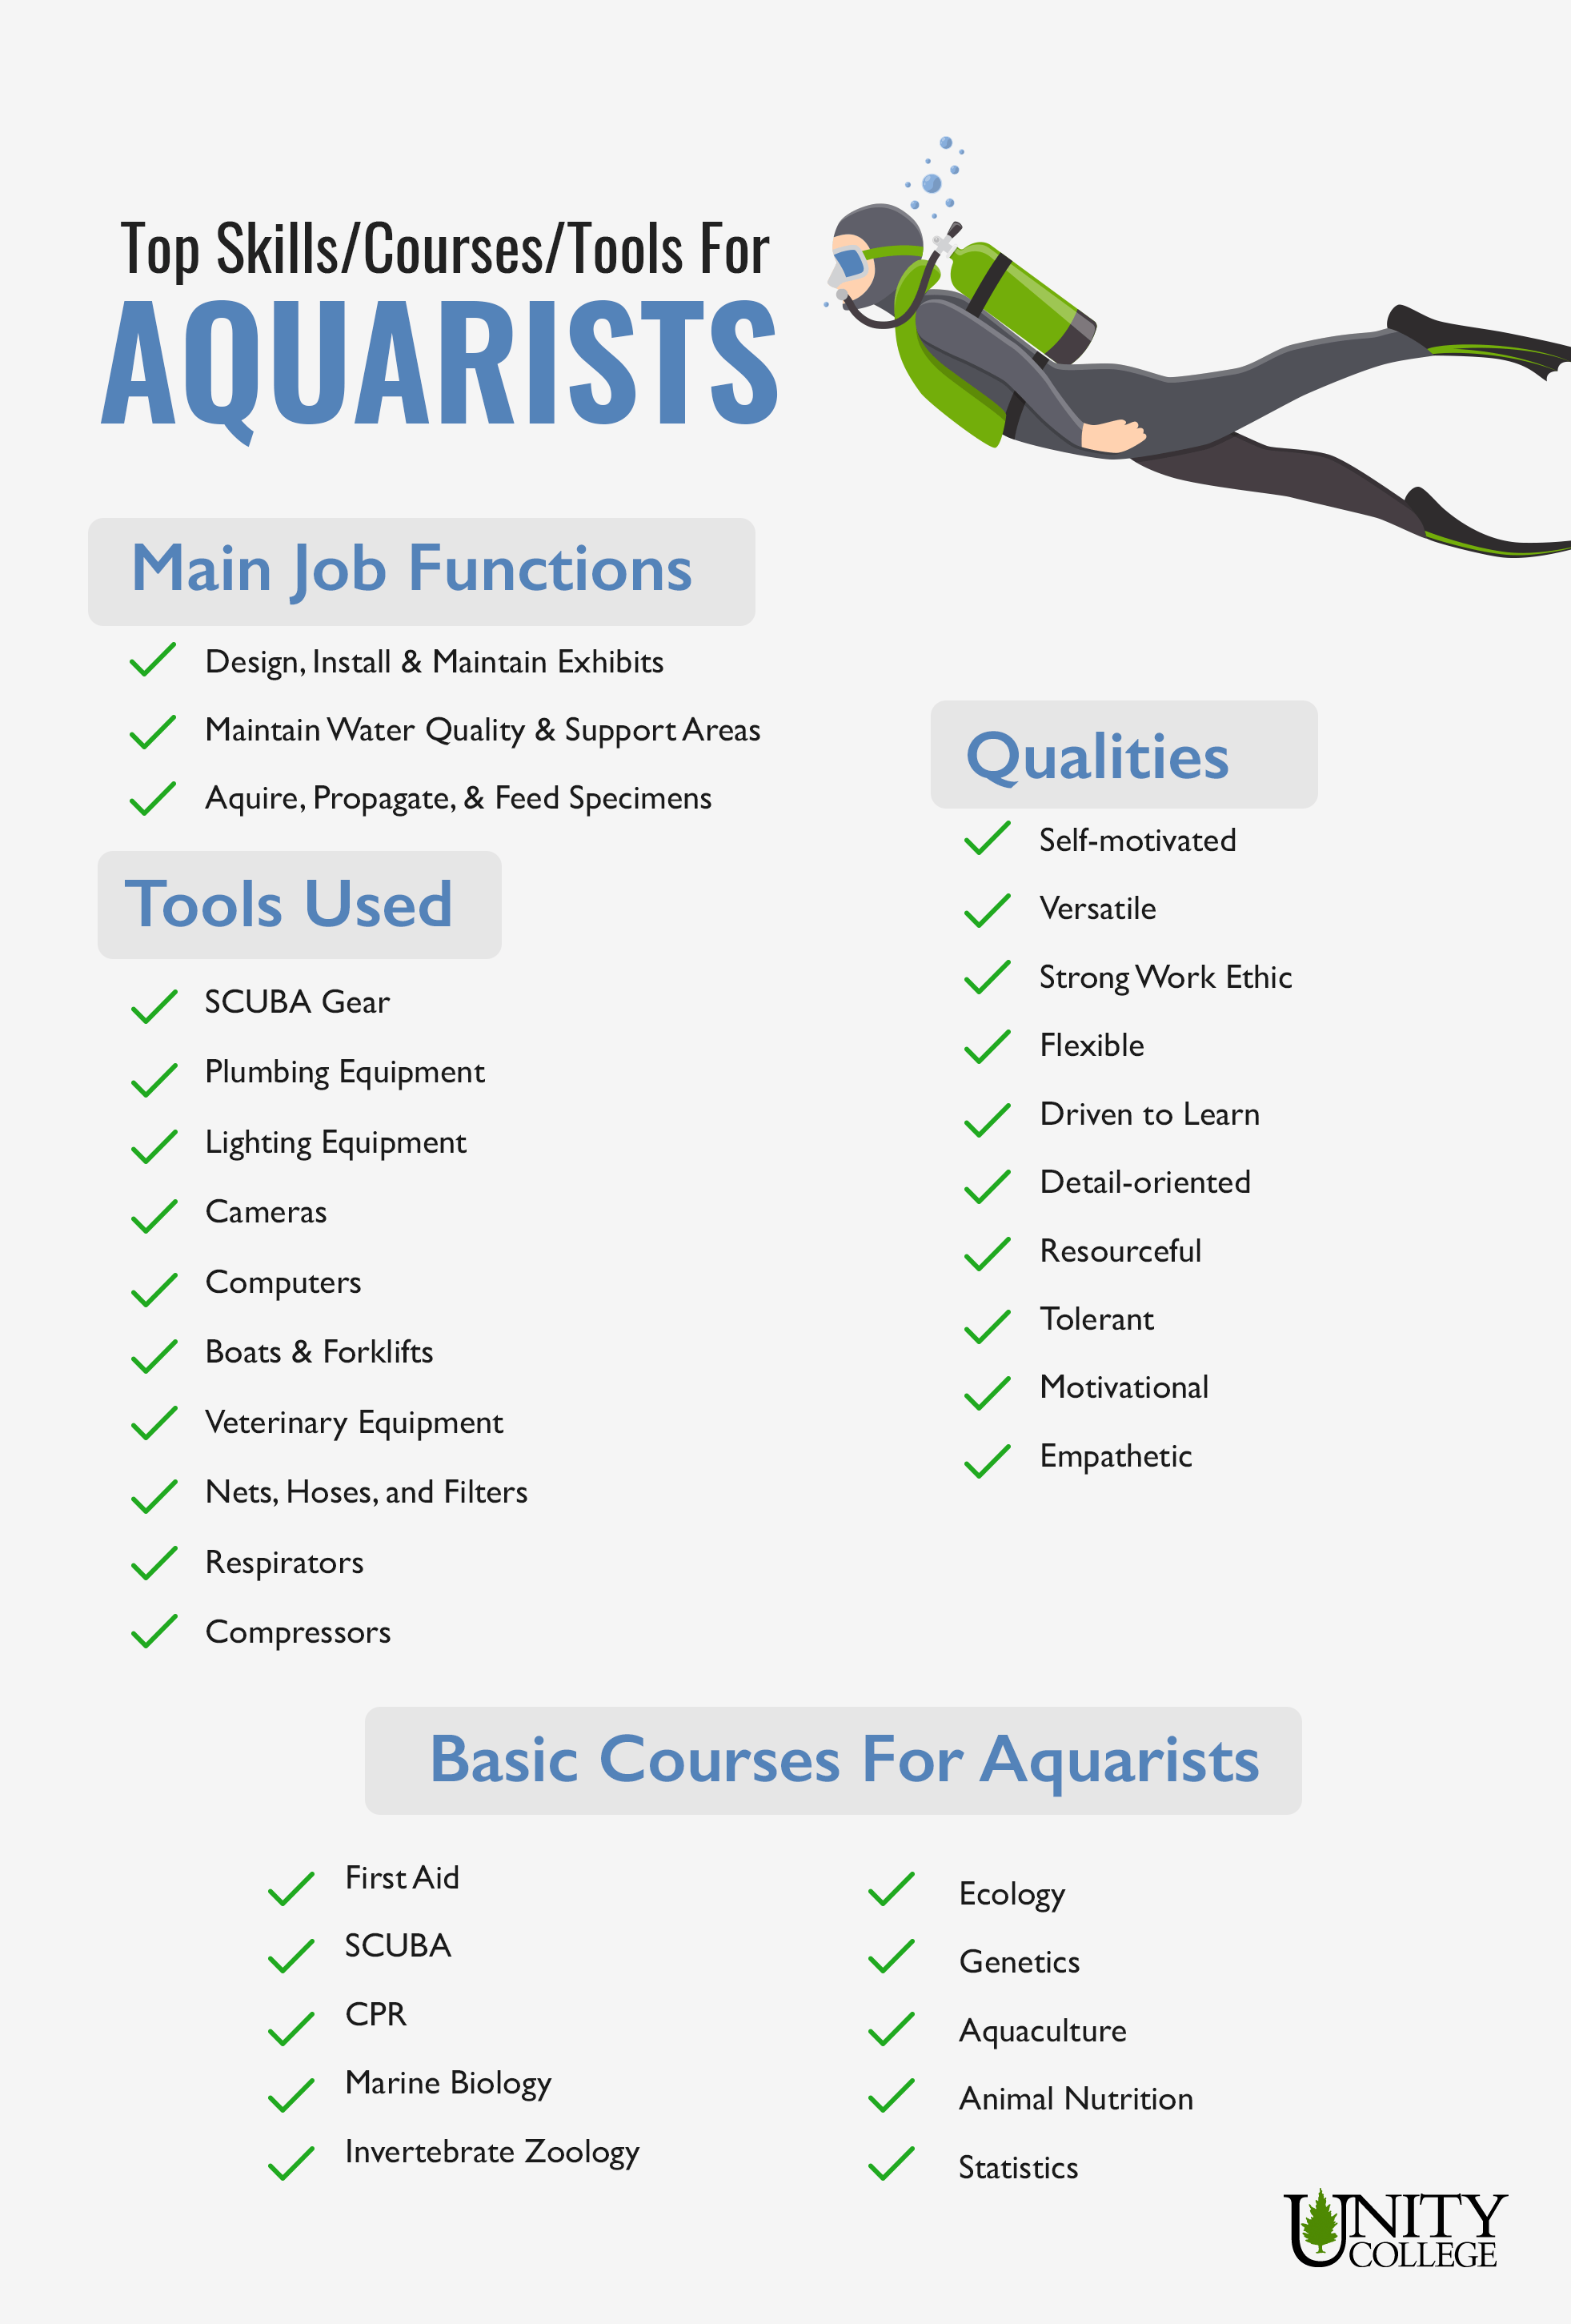 What Degree Do You Need to Work at an Aquarium?